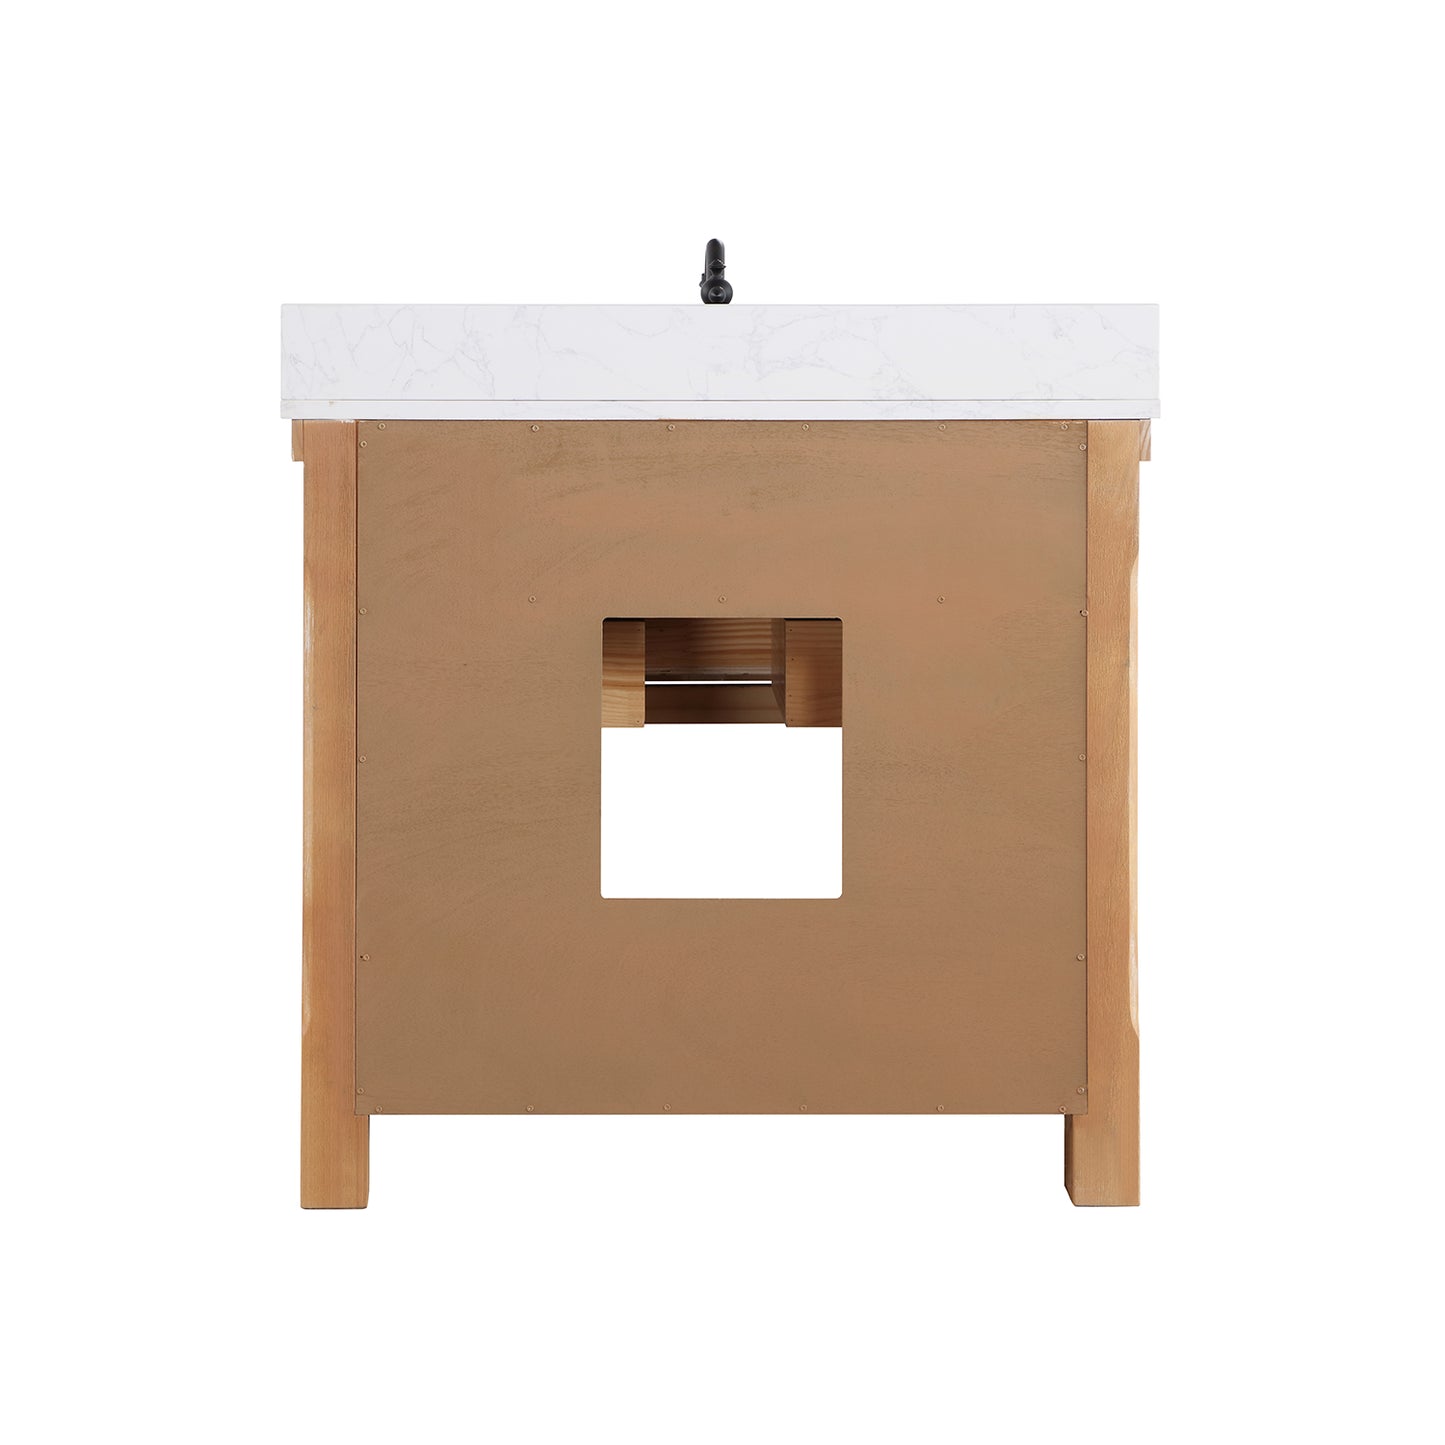 Villareal 36" Single Bath Vanity in Weathered Pine with Composite Stone Top in White, White Farmhouse Basin